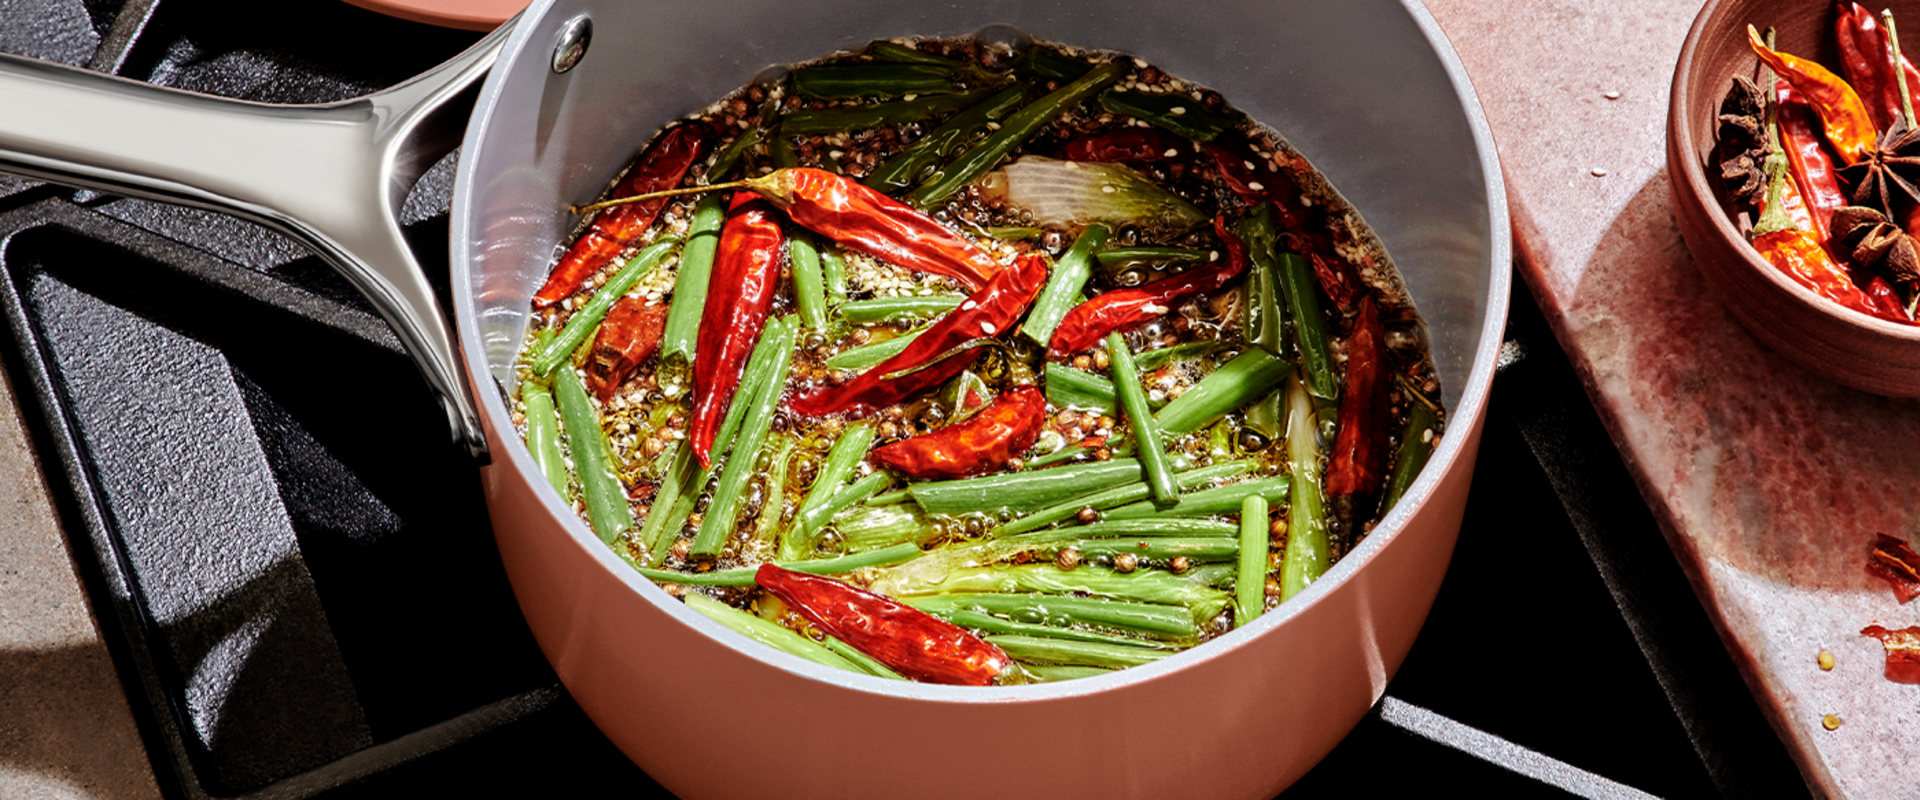 The Versatile Saucepan: A Guide to Making Chili Sauce